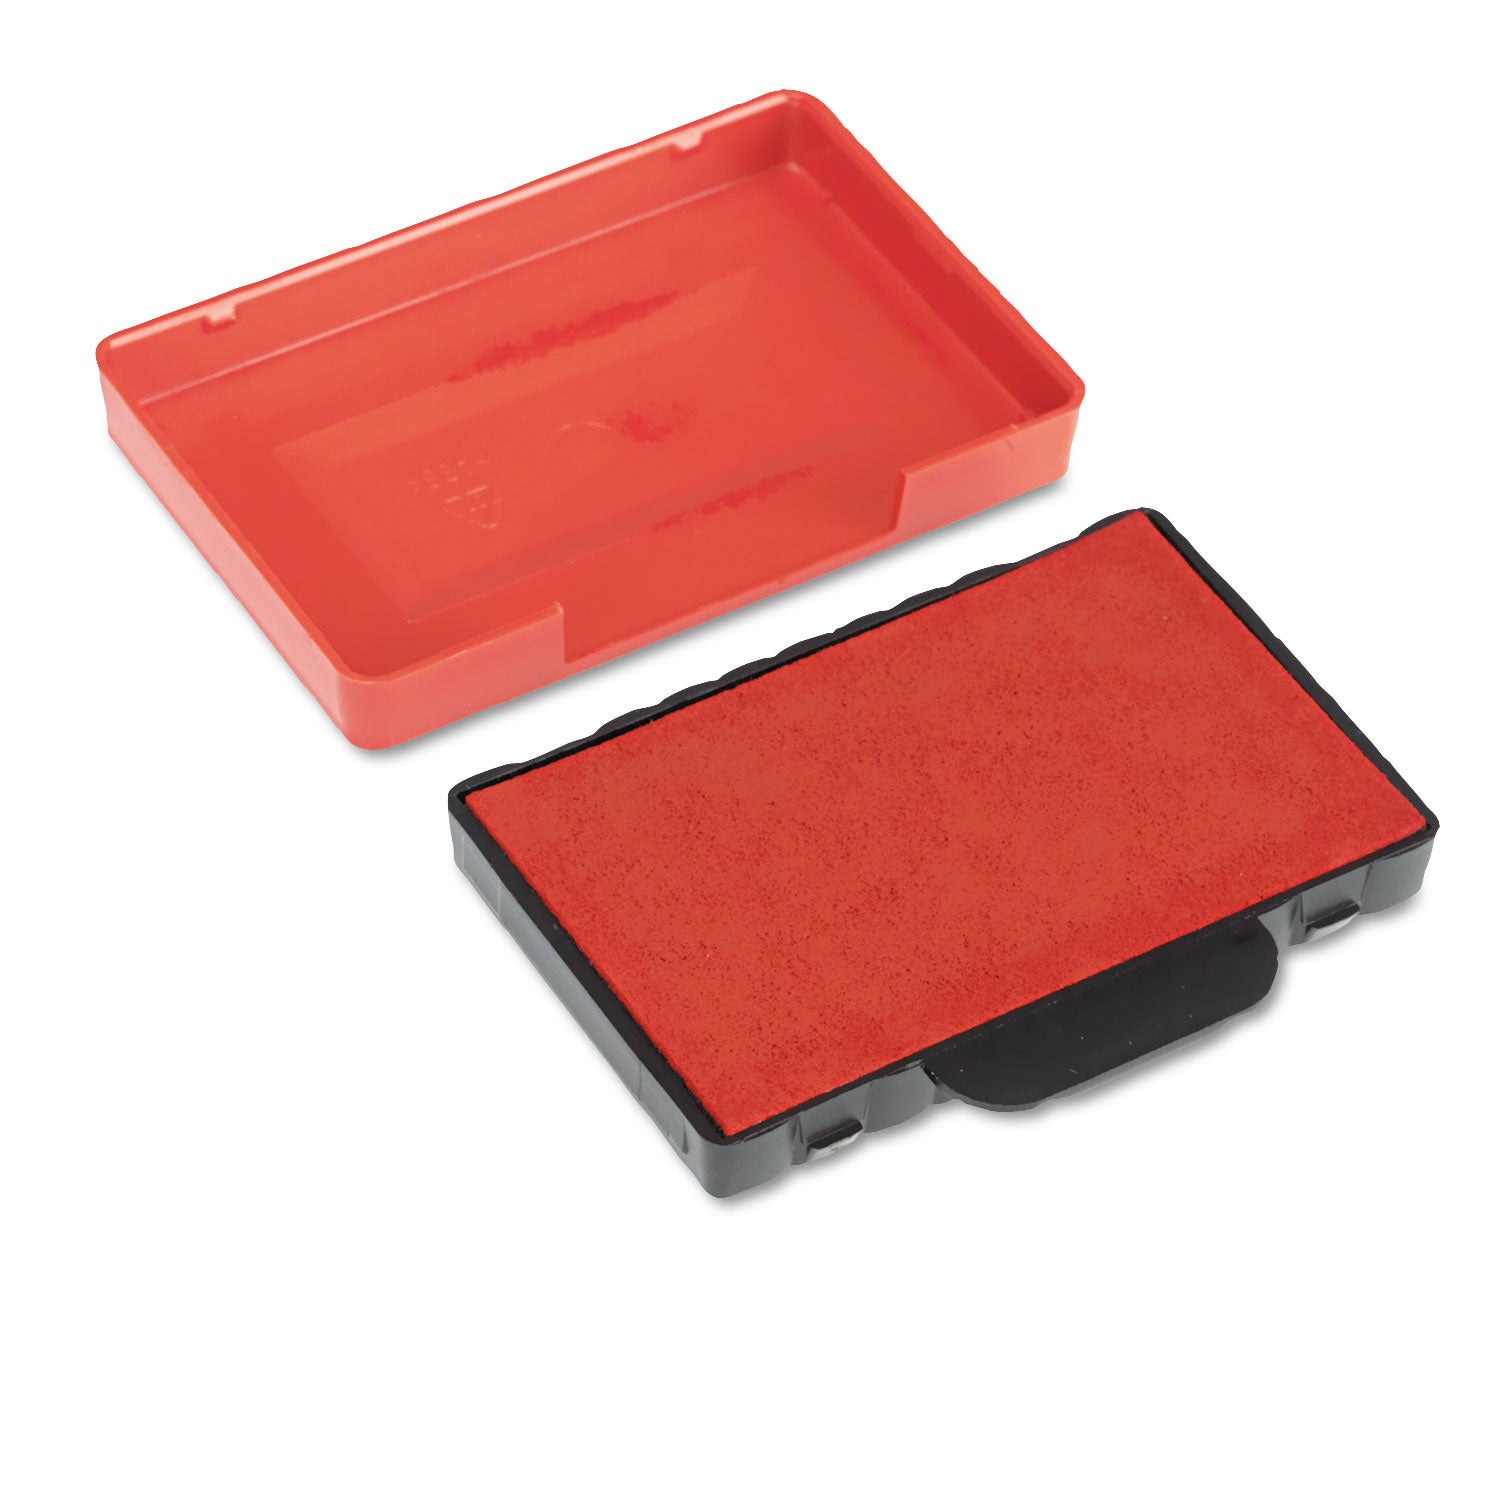 T5460 Professional Replacement Ink Pad for Trodat Custom Self-Inking Stamps, 1.38" x 2.38", Red - 